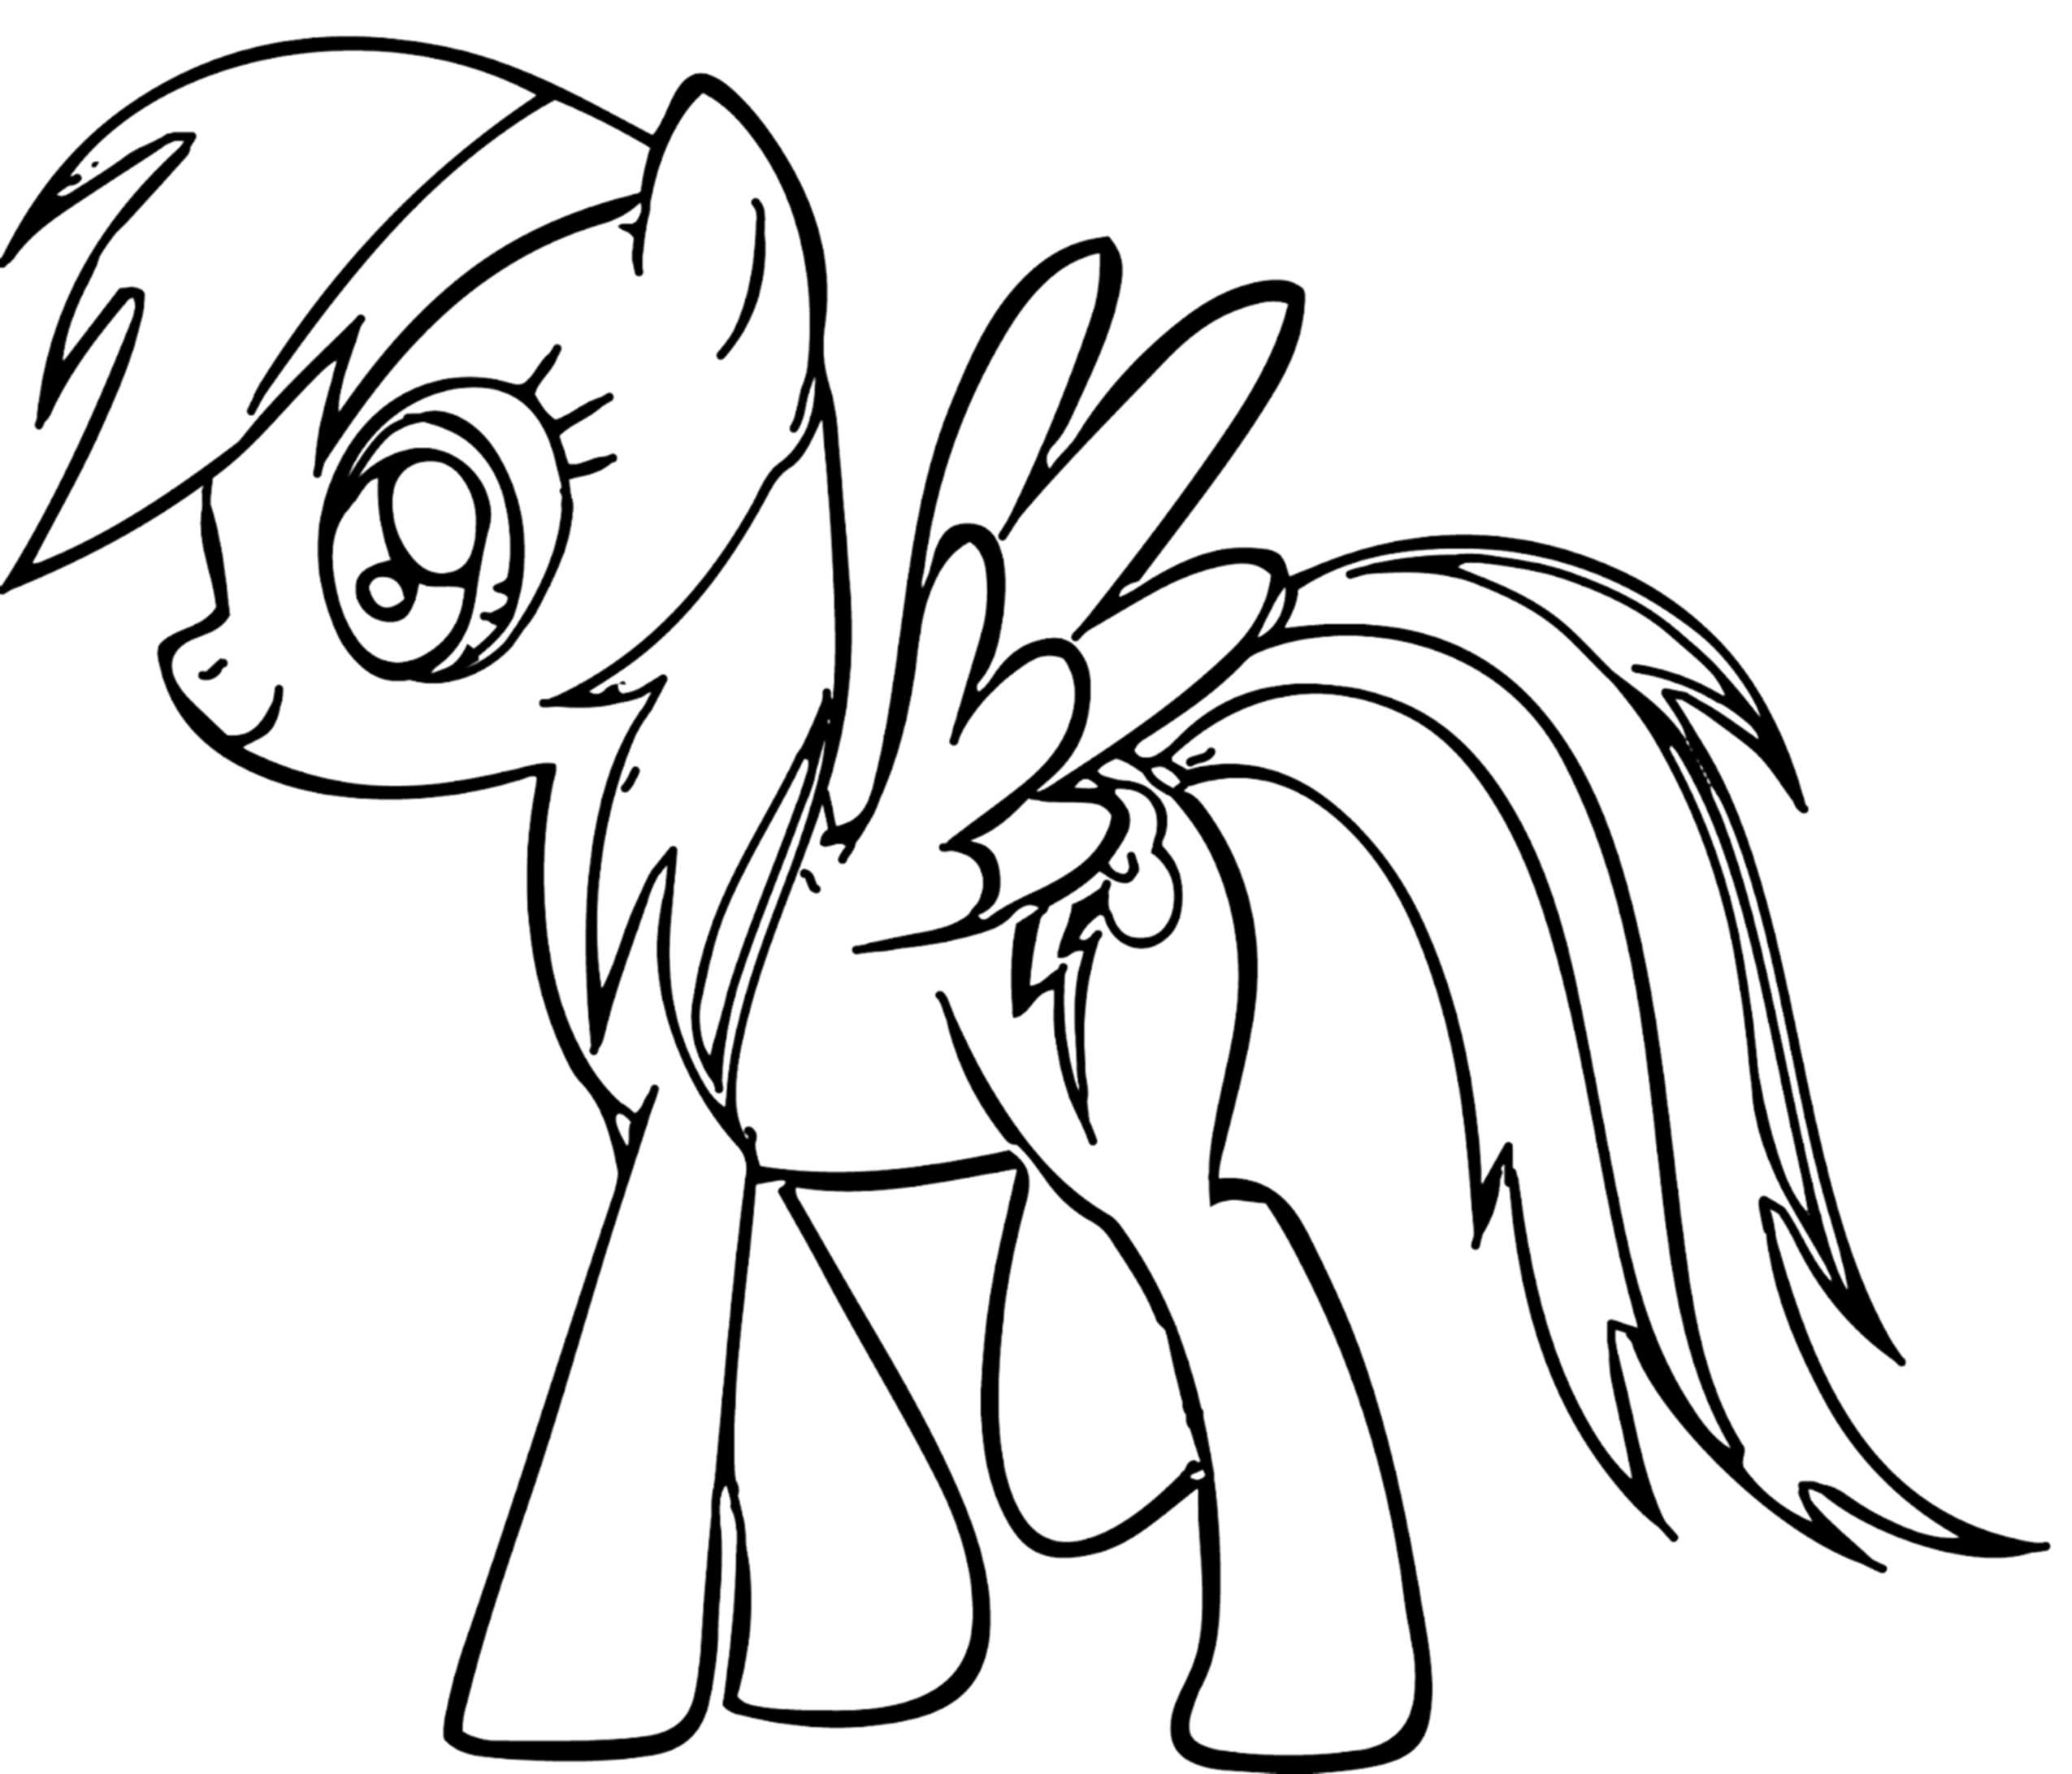 Download Rainbow Dash Coloring Pages - Best Coloring Pages For Kids